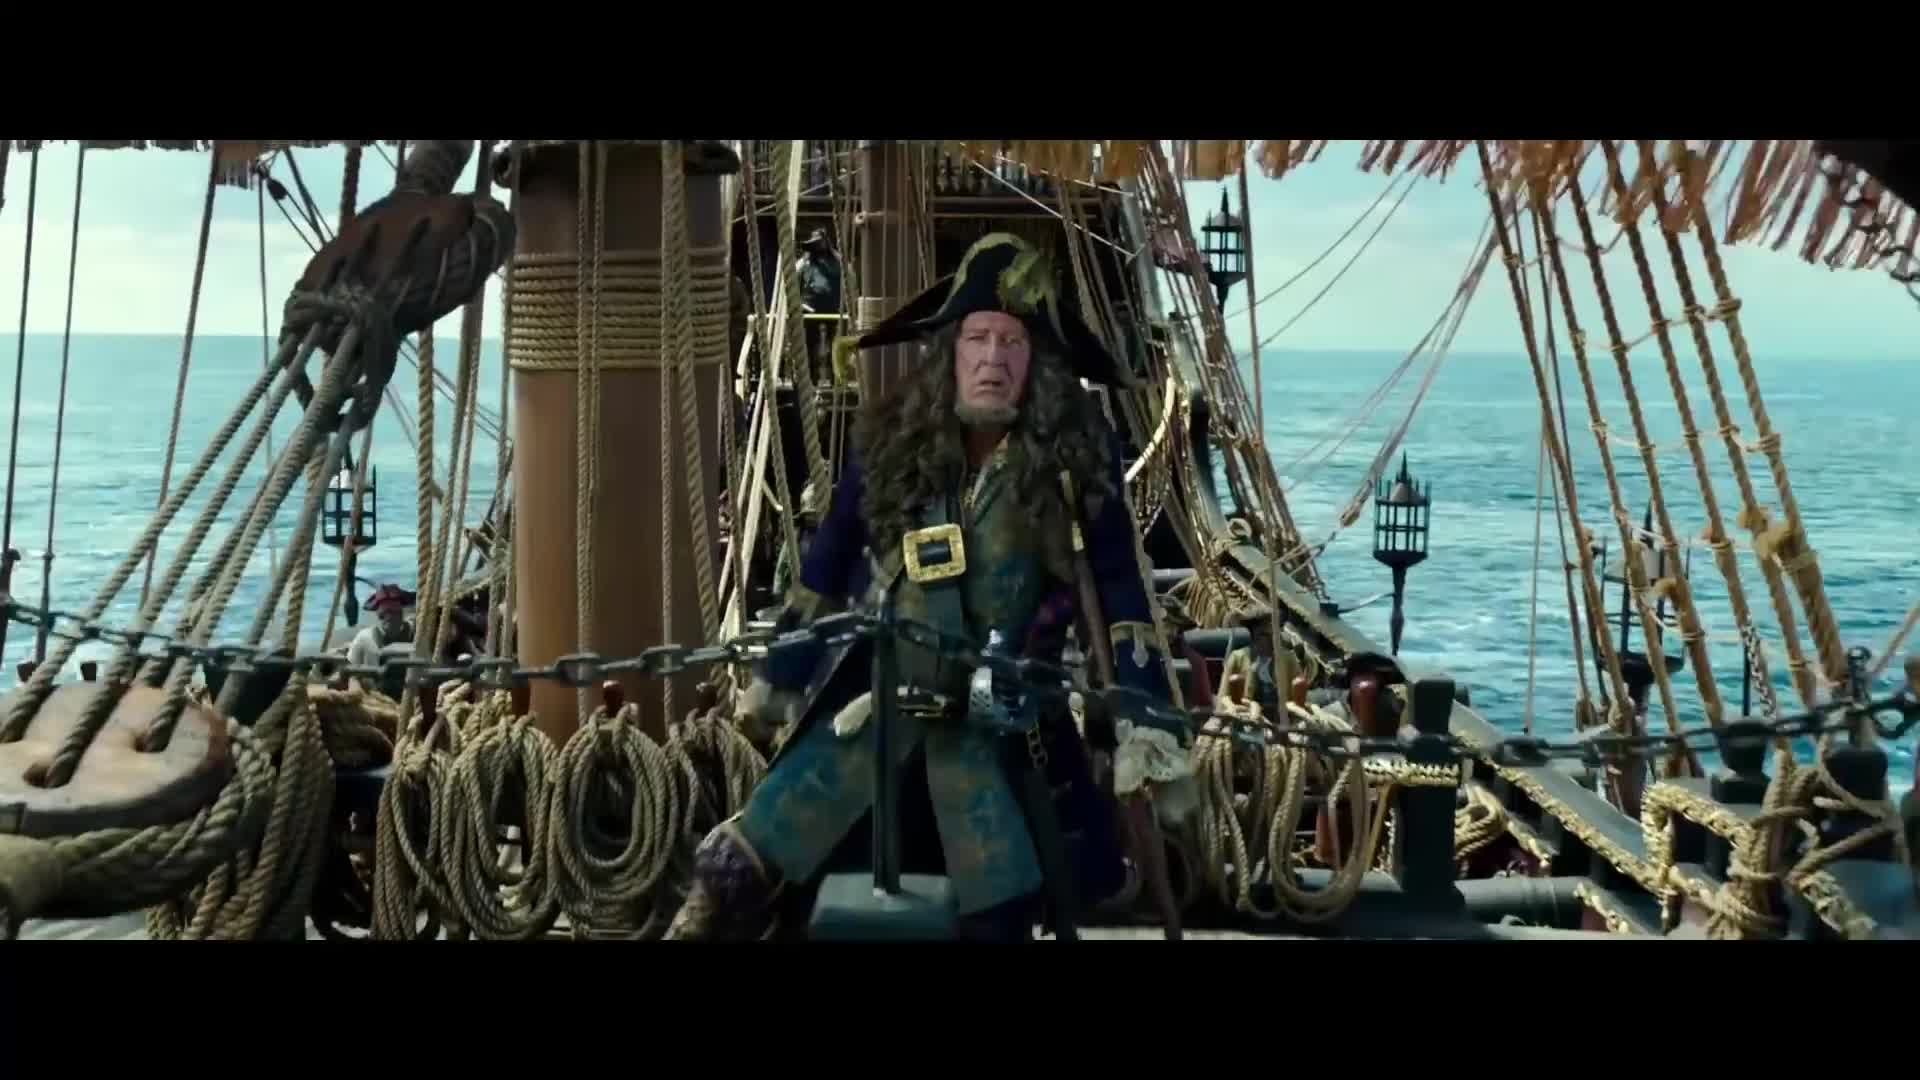 PIRATES OF THE CARIBBEAN 5 Trailer